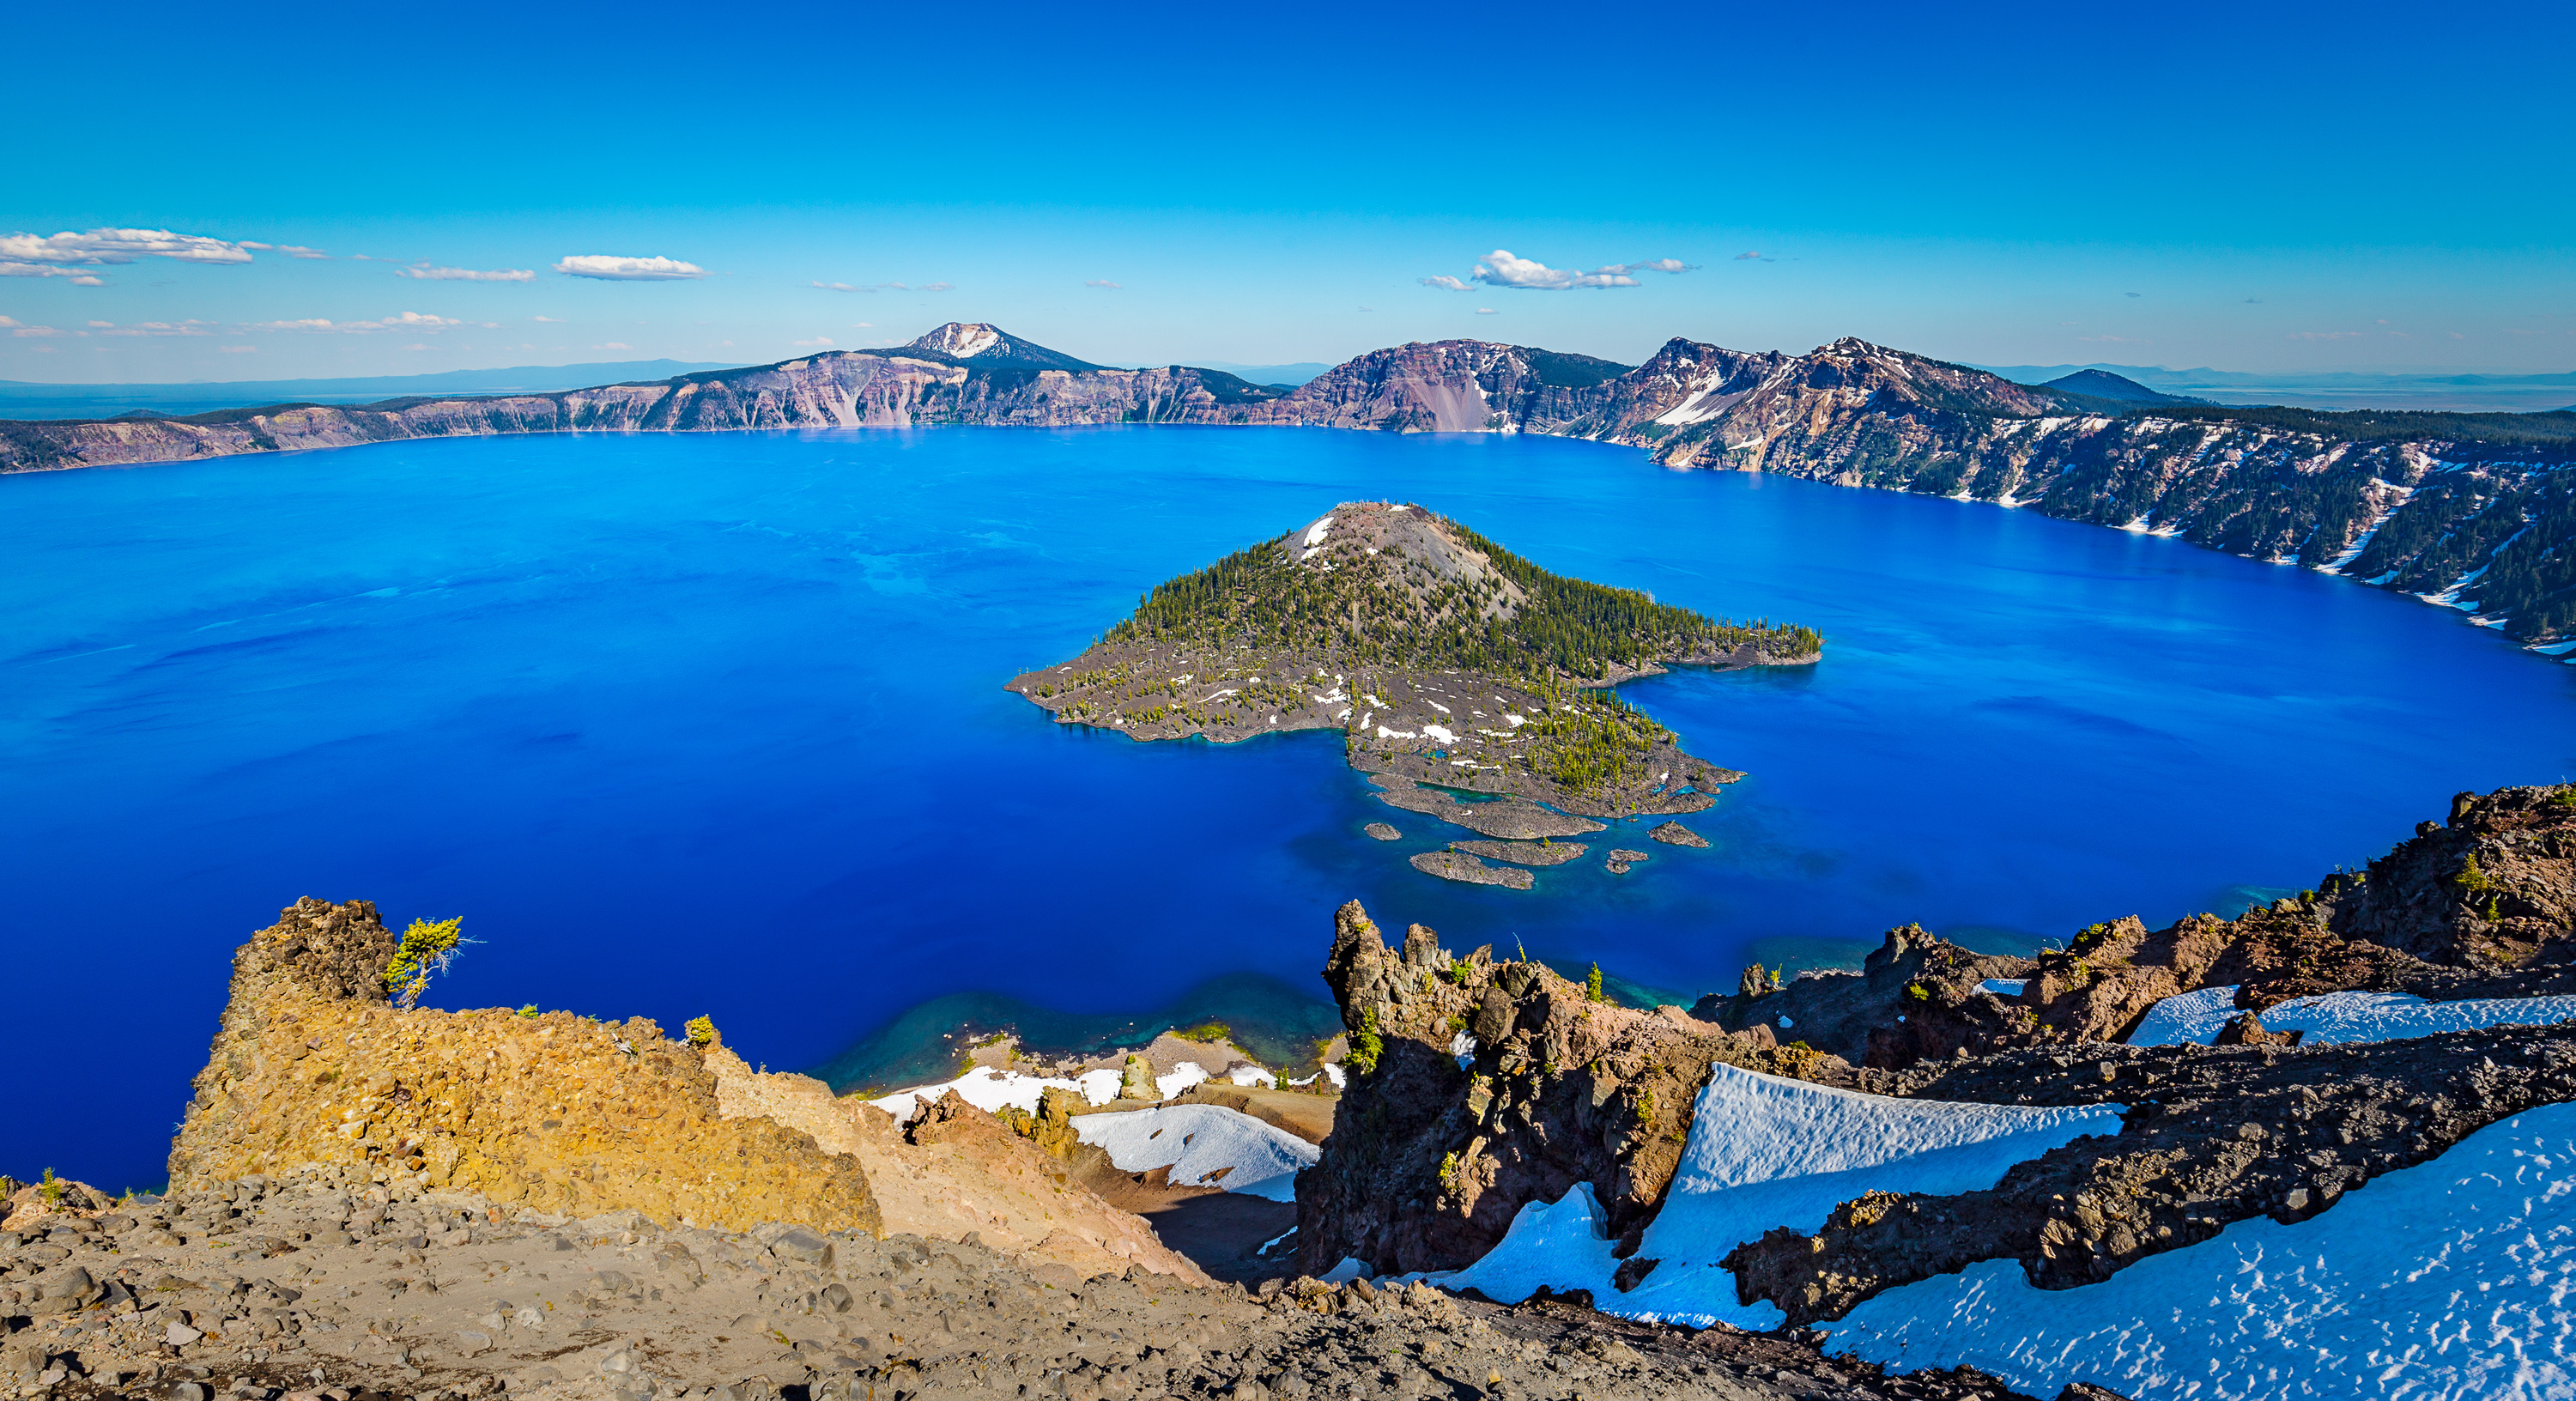 When it first comes into view, the color of Crater Lake simply takes anyone's breath away. It is so saturated blue that he/she must pinch himself/herself to realize that it isn't fake. It is real. But, how can it be so blue? Pure water of the deepest lake in the US basically absorbs all the colors of spectrum. In other words, only the blue wavelengths bounce back out.